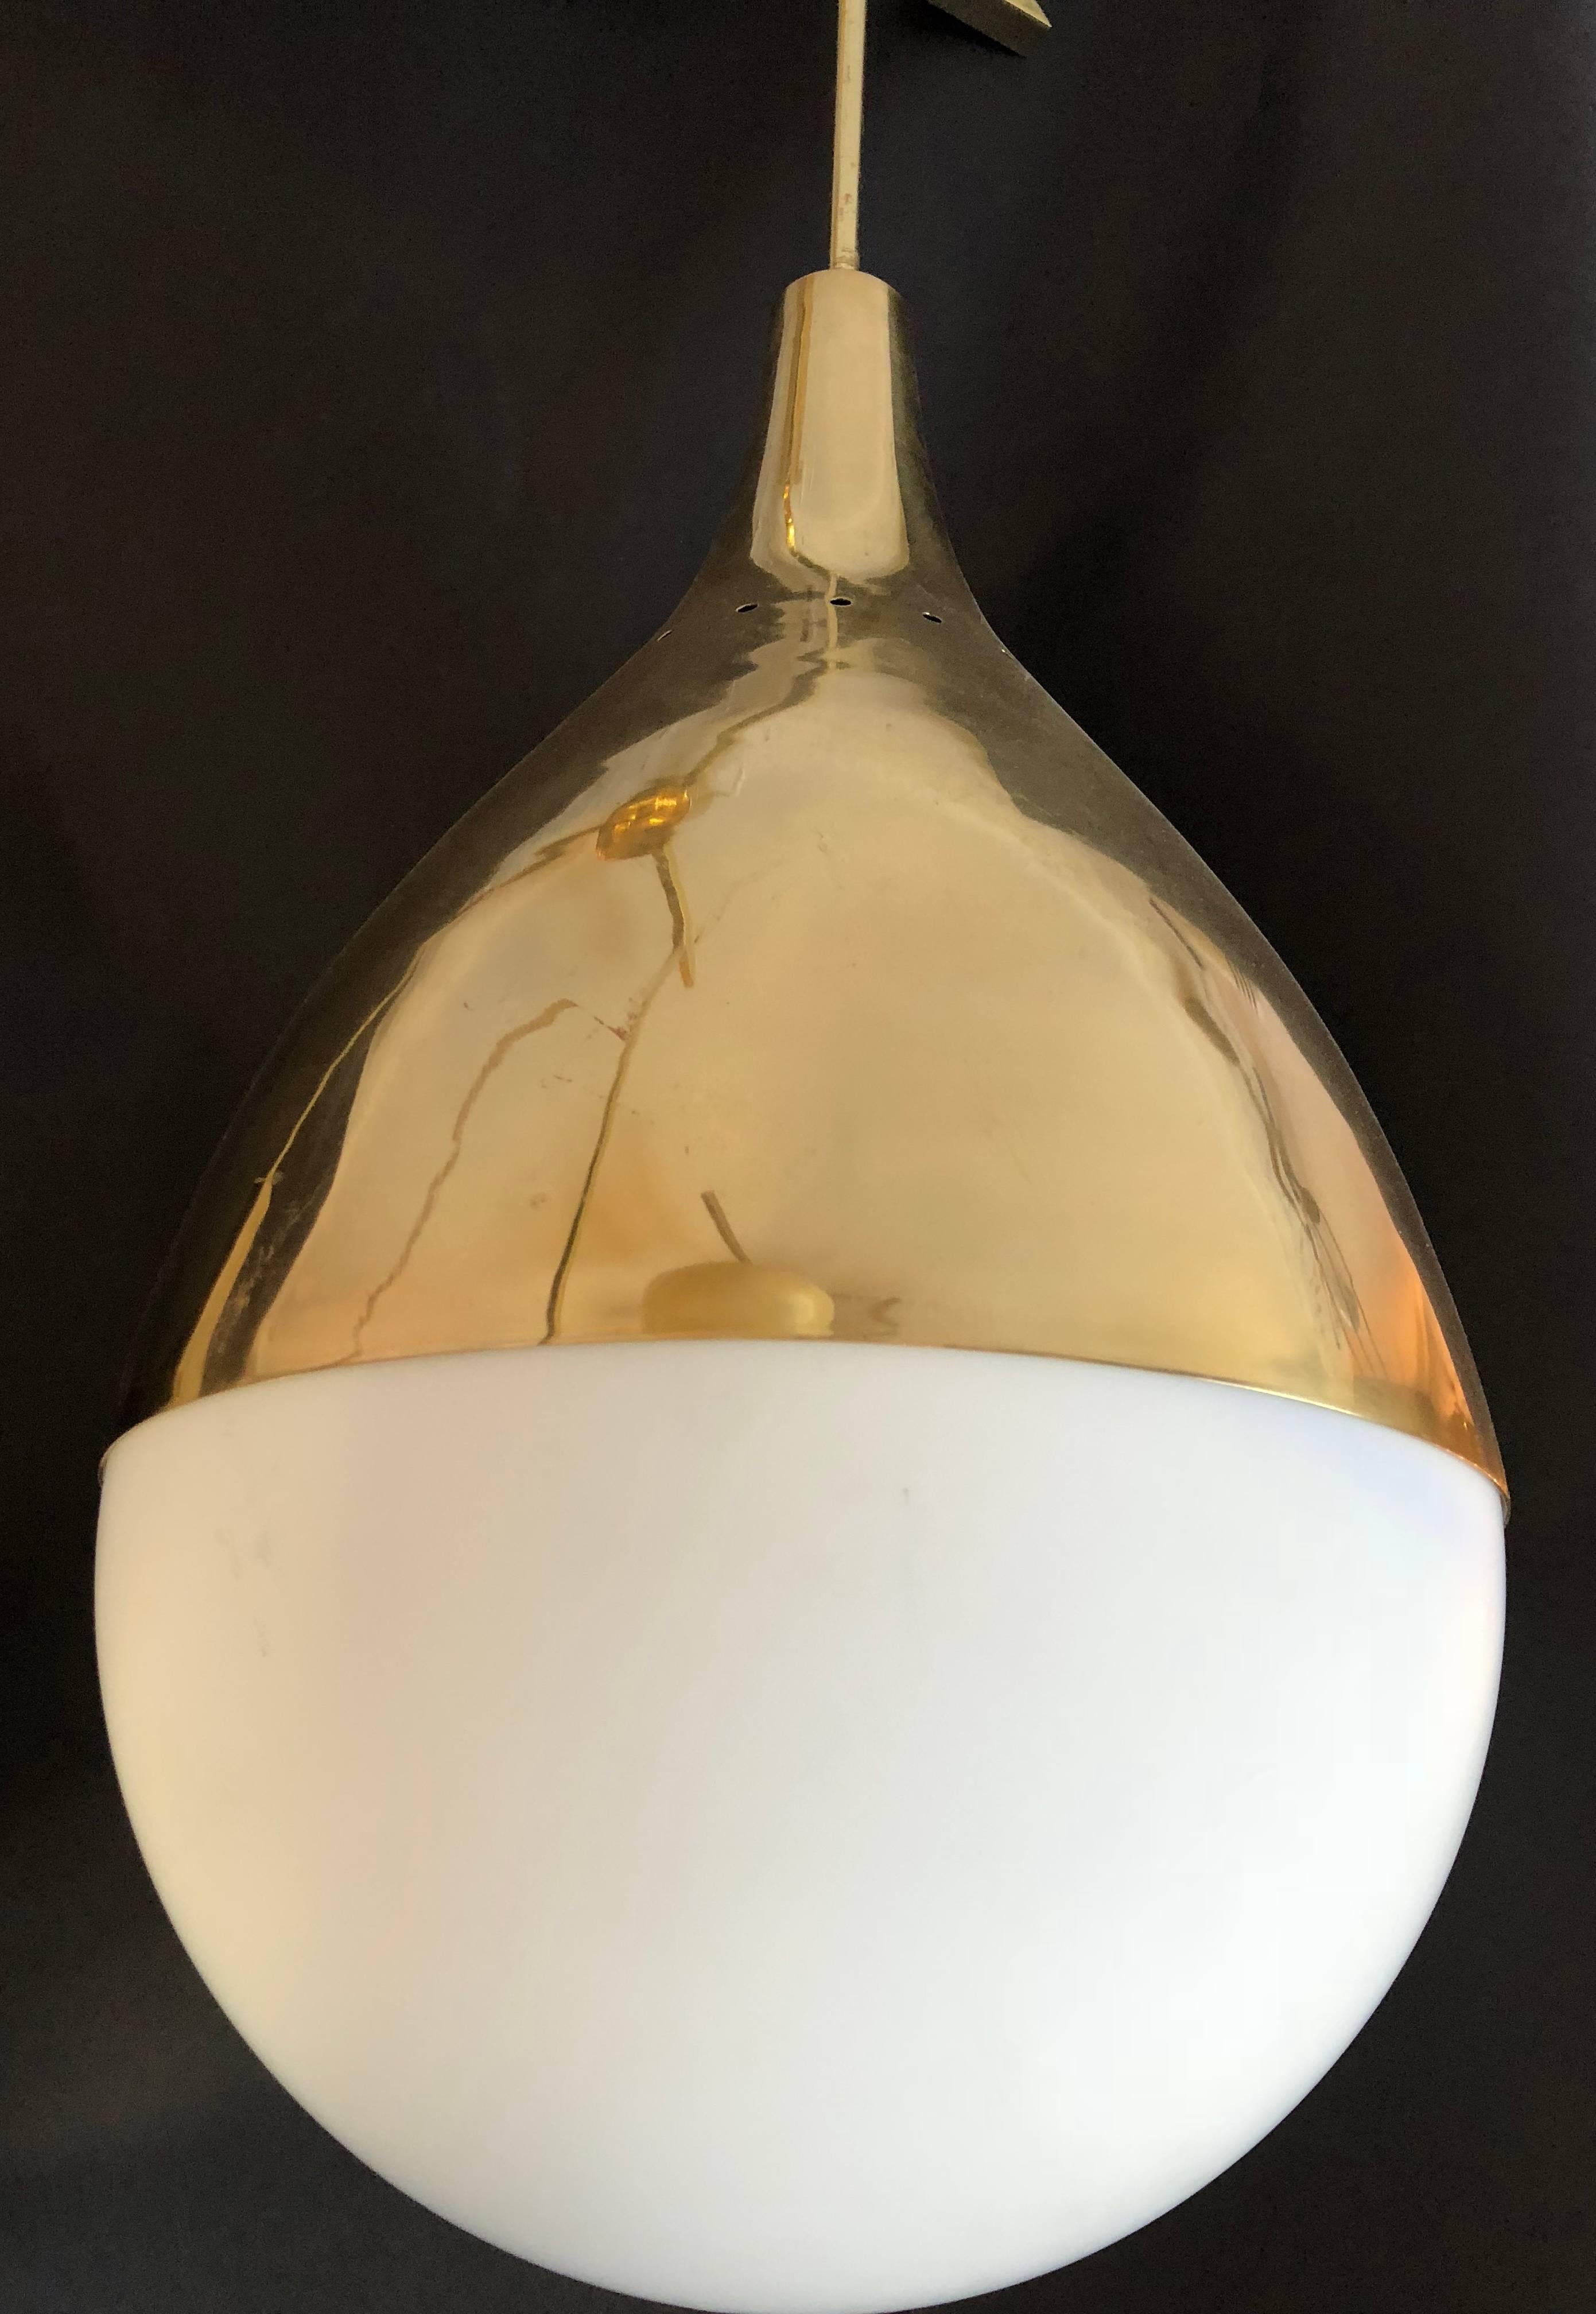 In the style of Stilnovo, Chandelier with three-light,
Golden brass and opaline glass,
circa 2000, Italy.

Measures: Height 112 cm, diameter 70 cm.